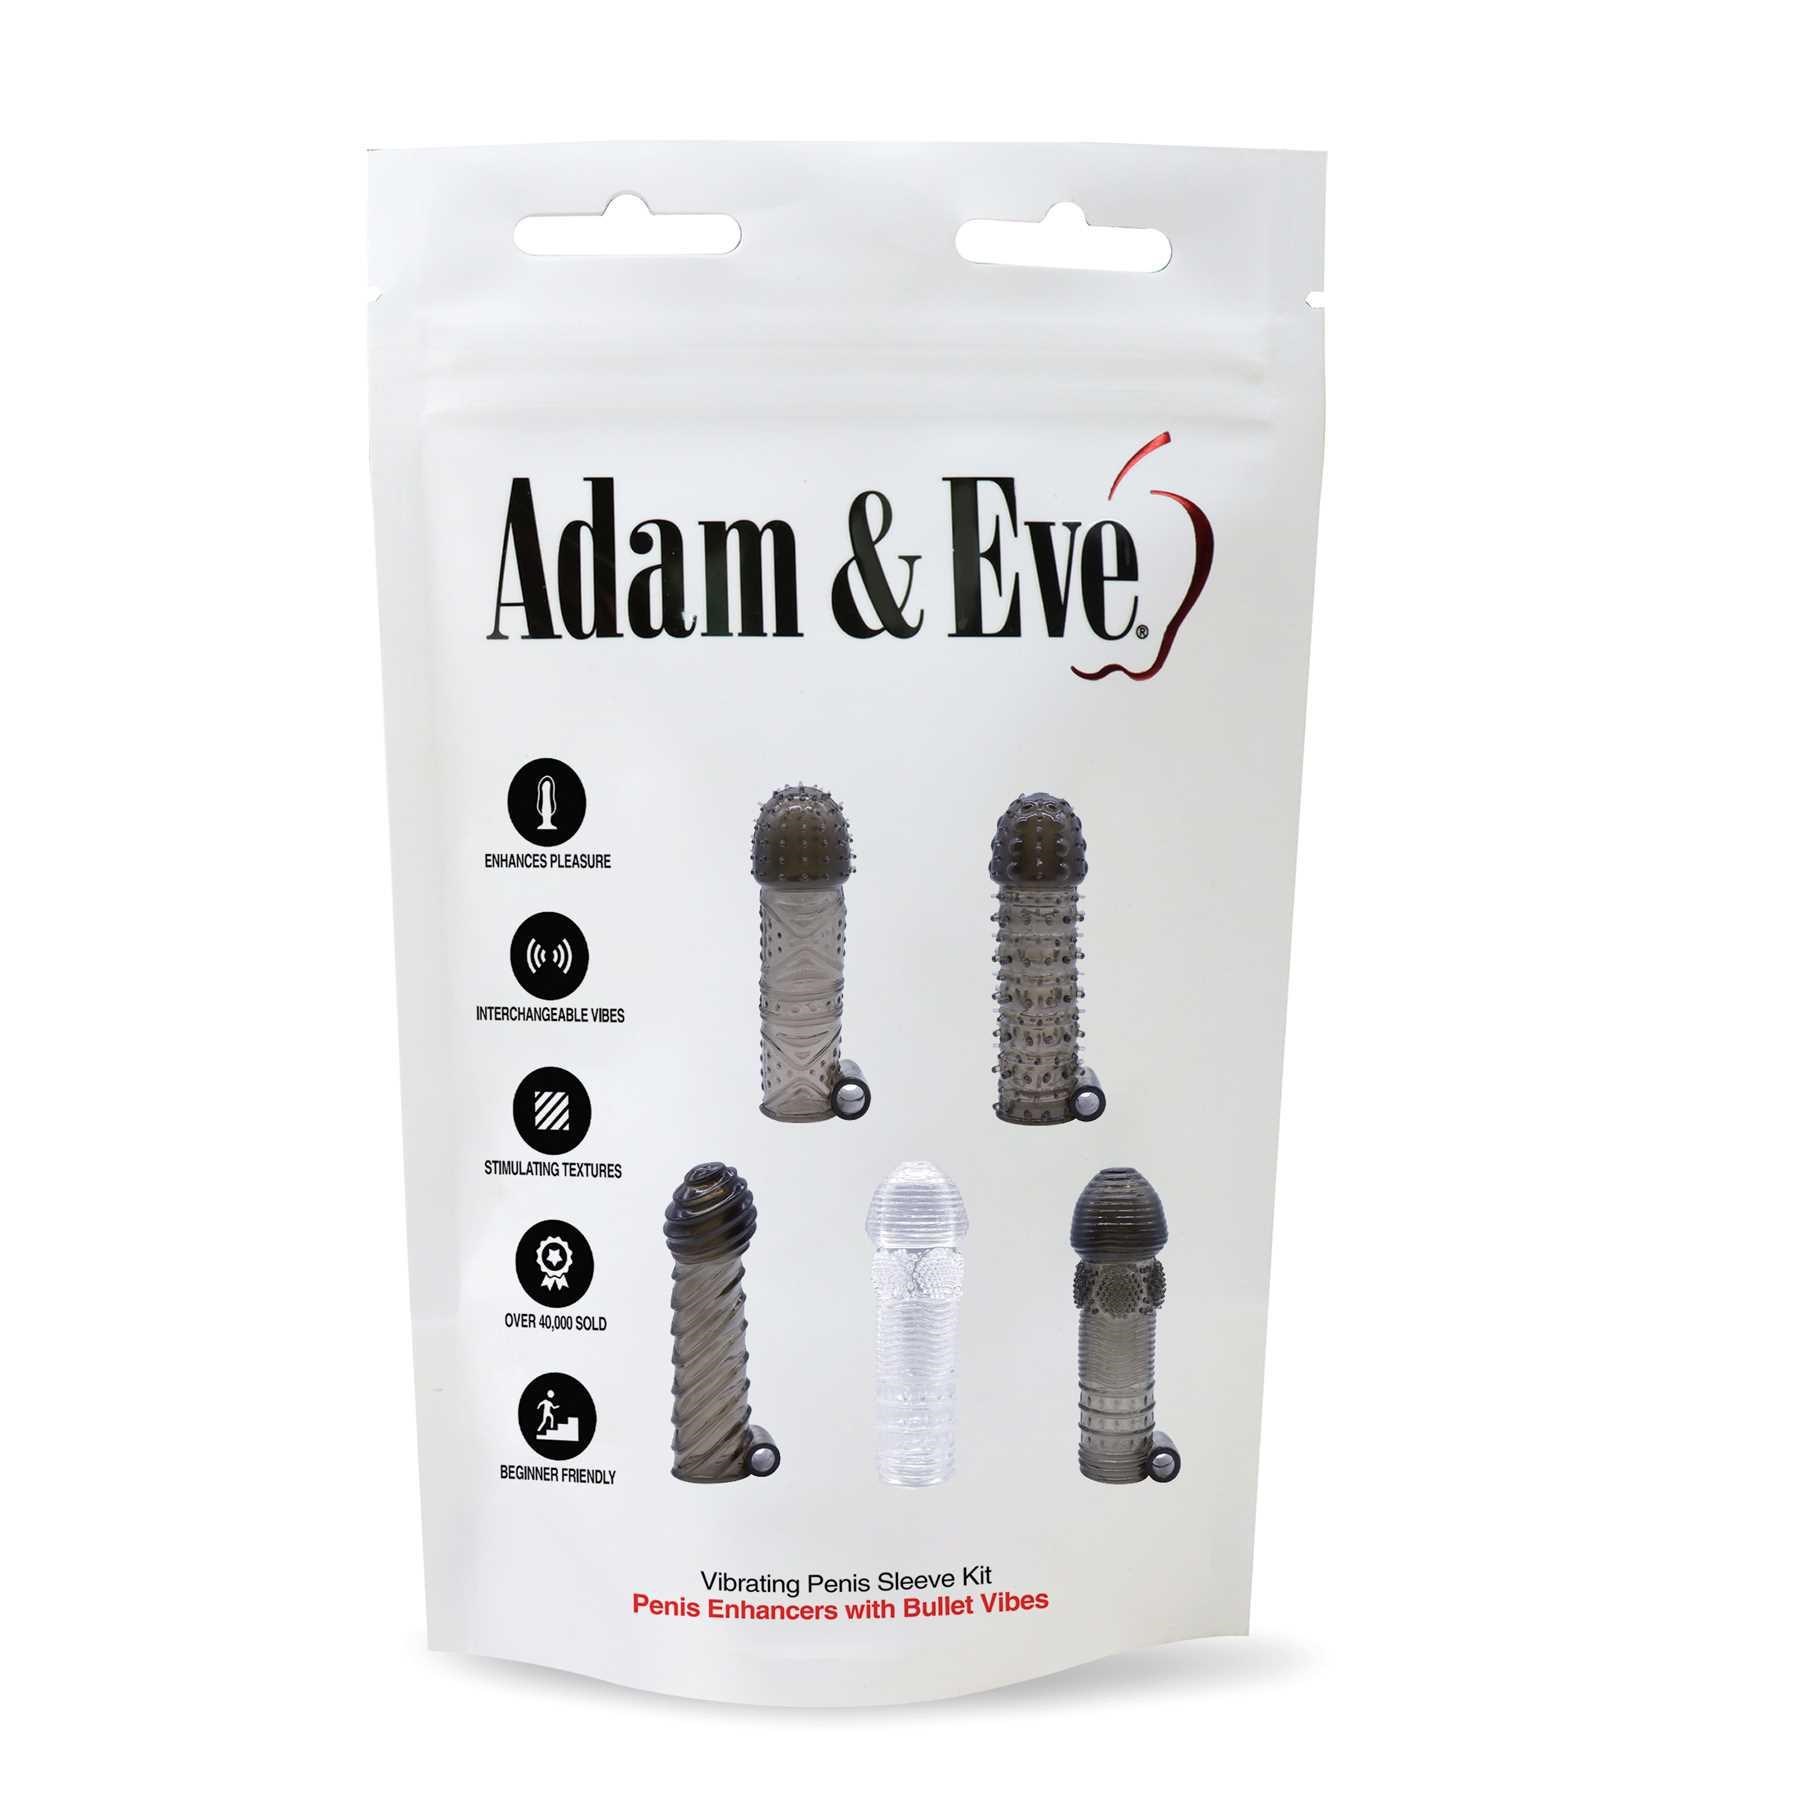 ADAM AND EVE VIBRATING PENIS SLEEVE KIT front of box